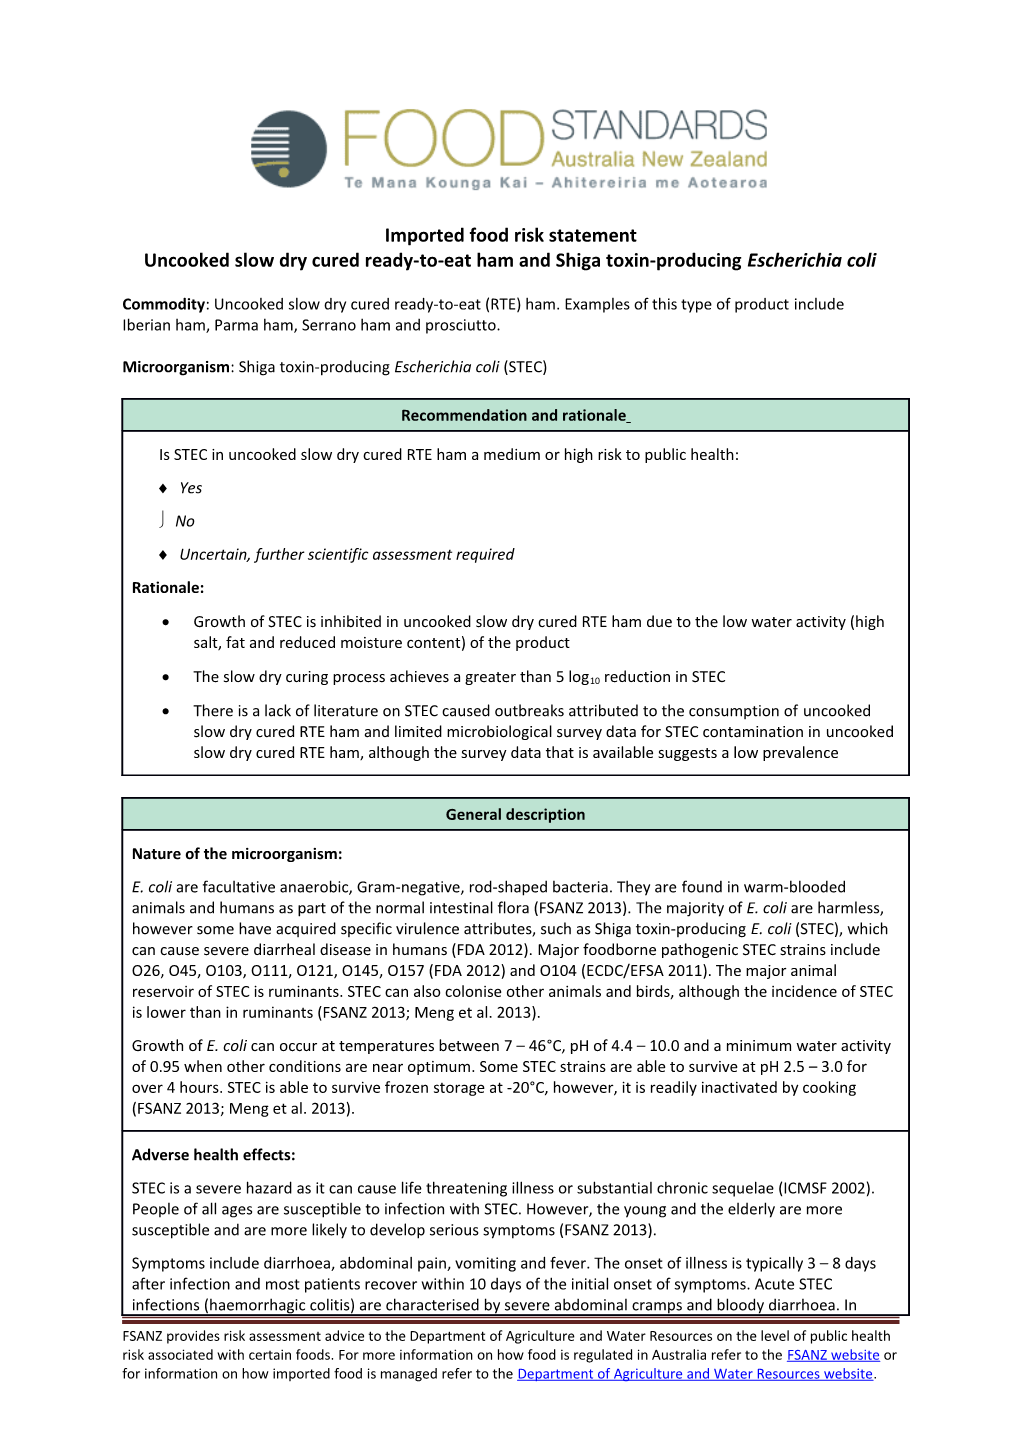 Imported Food Risk Statement s4